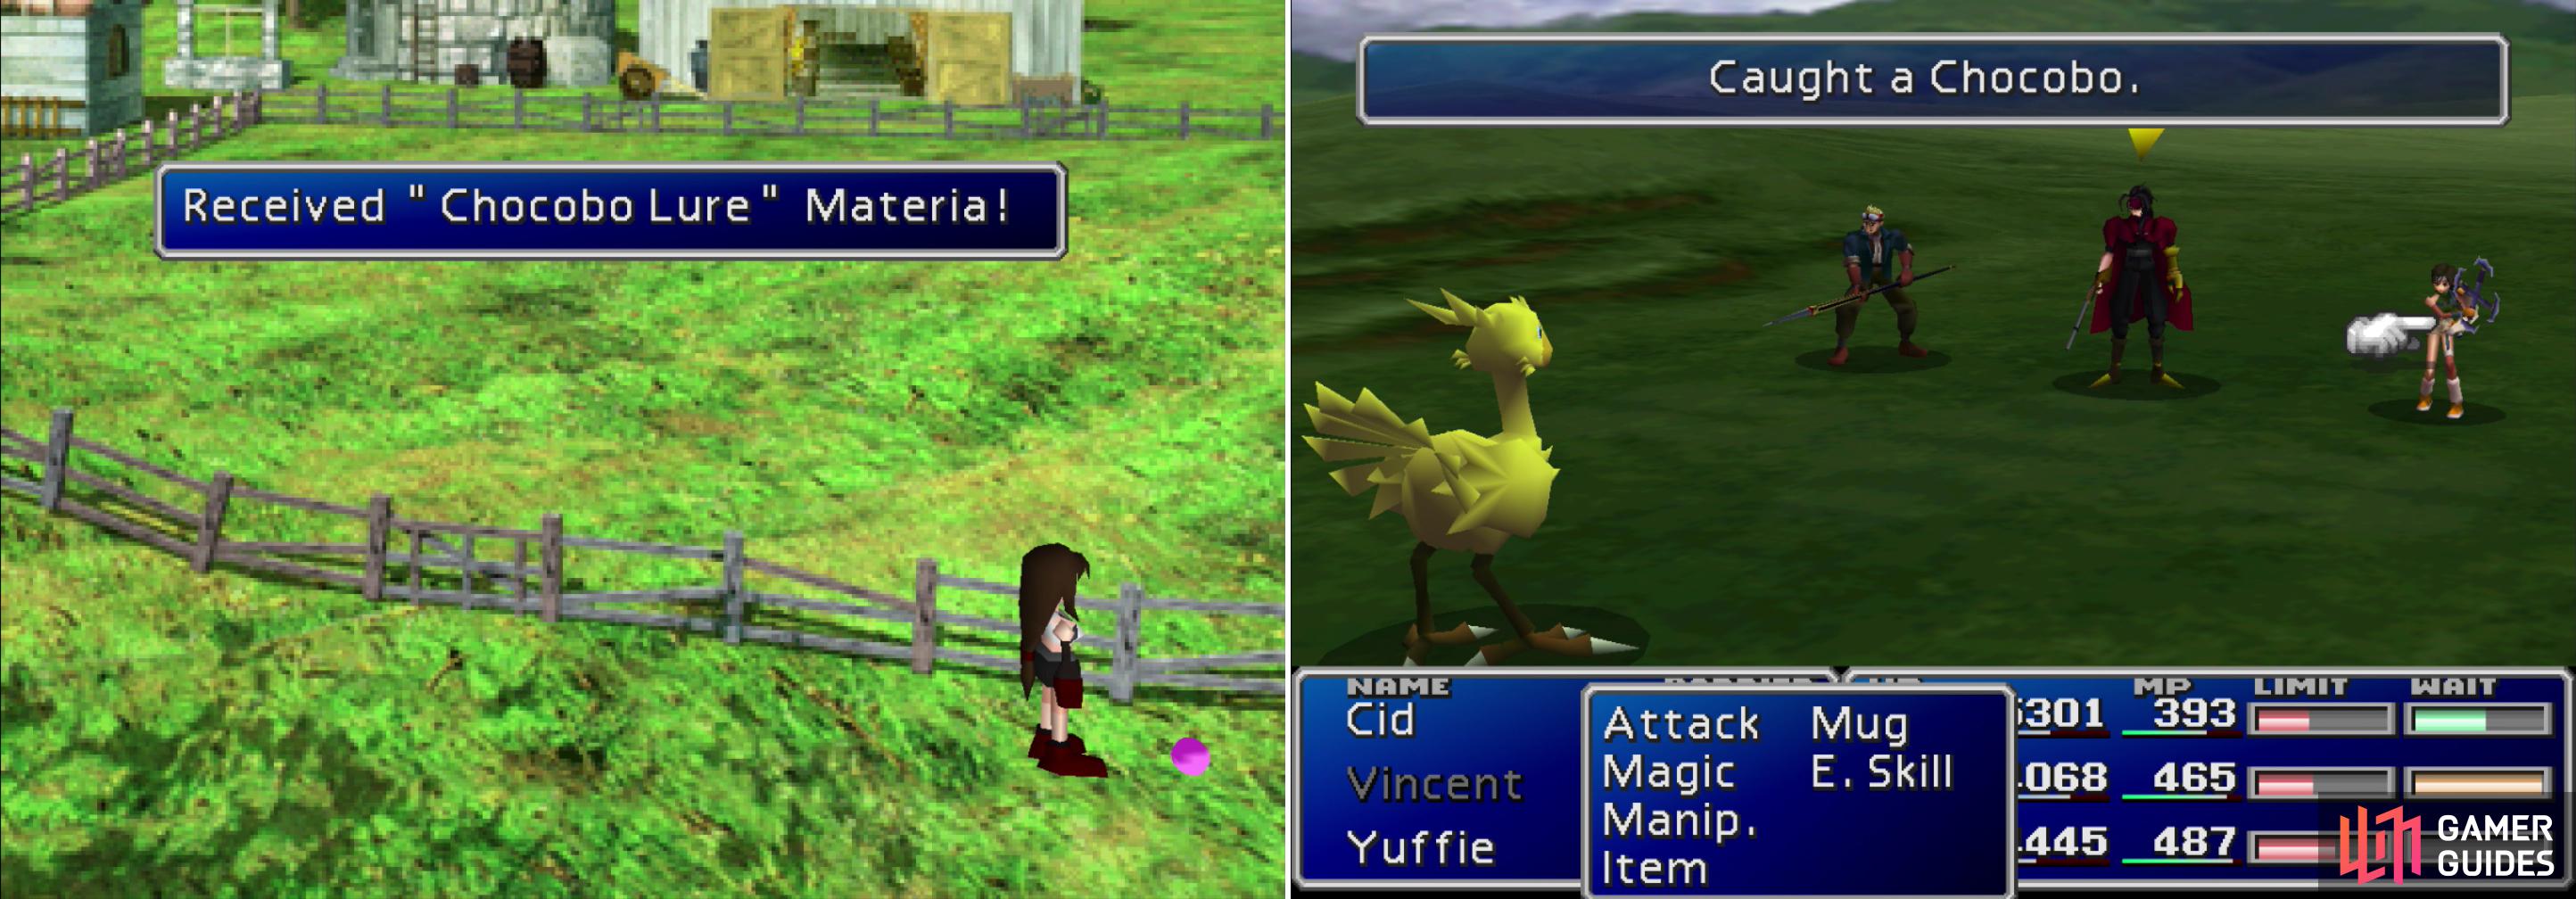 You can score some Chocobo Lure Materia if you return to the Chocobo Farm in disc 2 (left). Quickly kill the enemies traveling with a Chocobo to capture it!